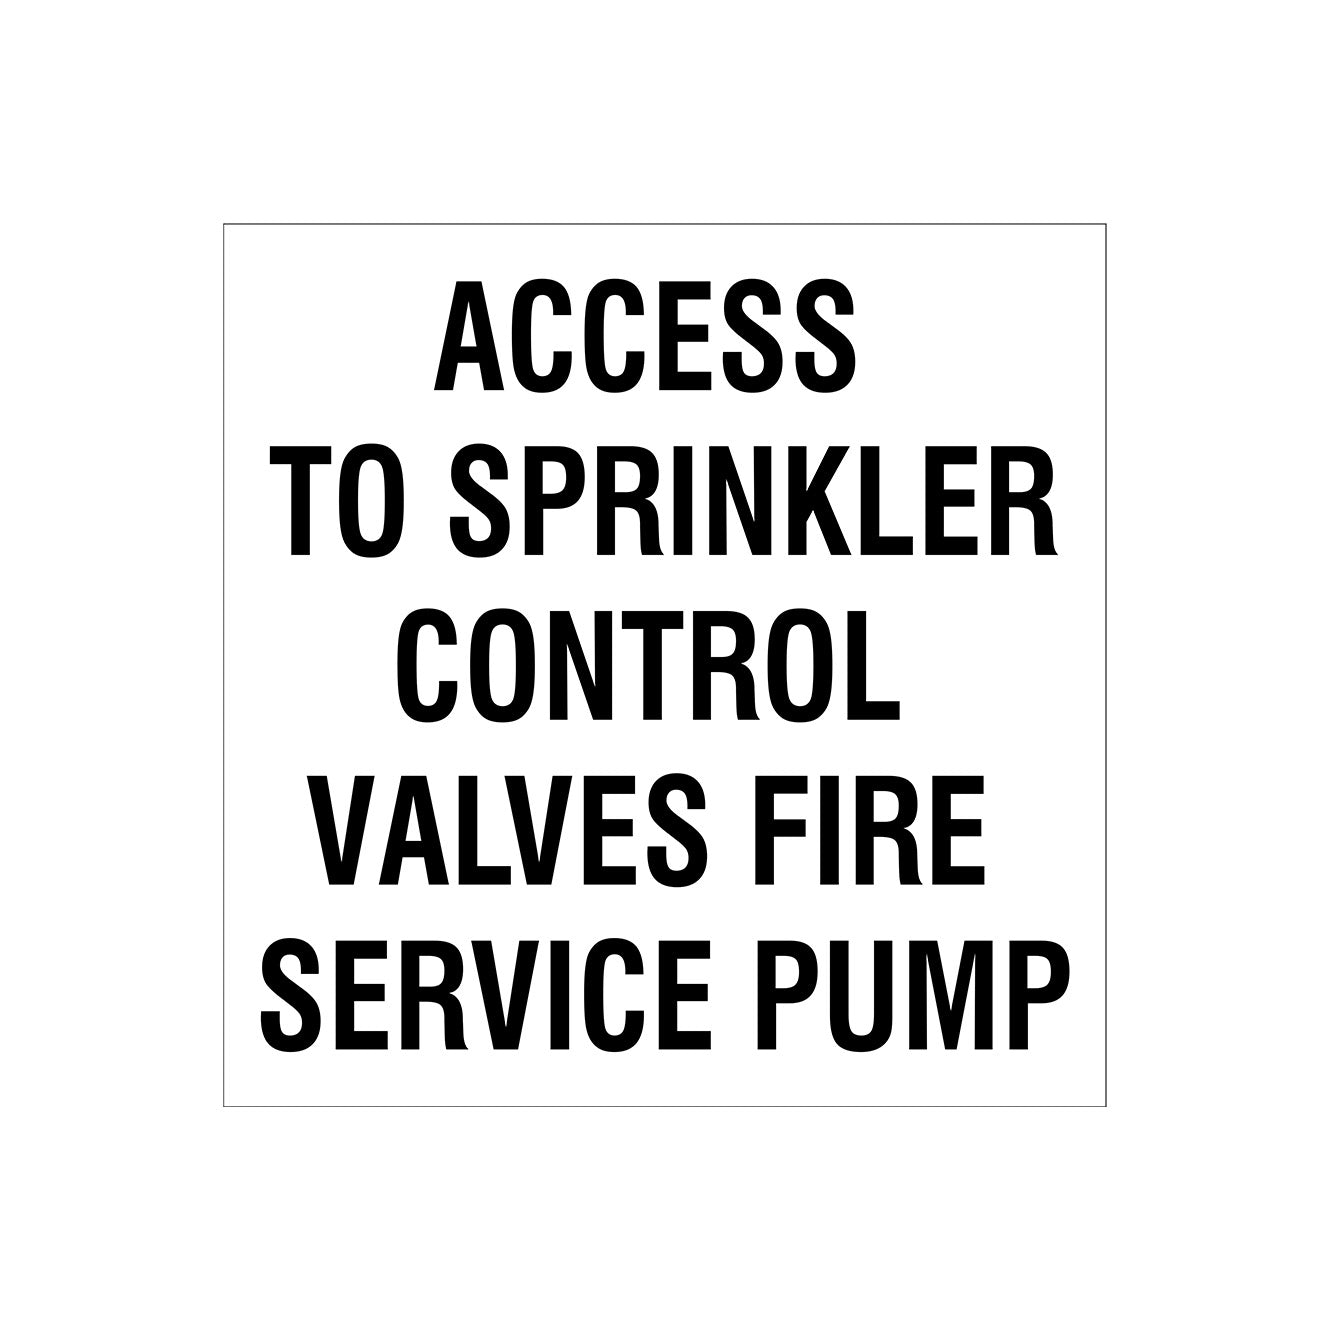 ACCESS TO SPRINKLER CONTROL VALVES FIRE SERVICE PUMP SIGN